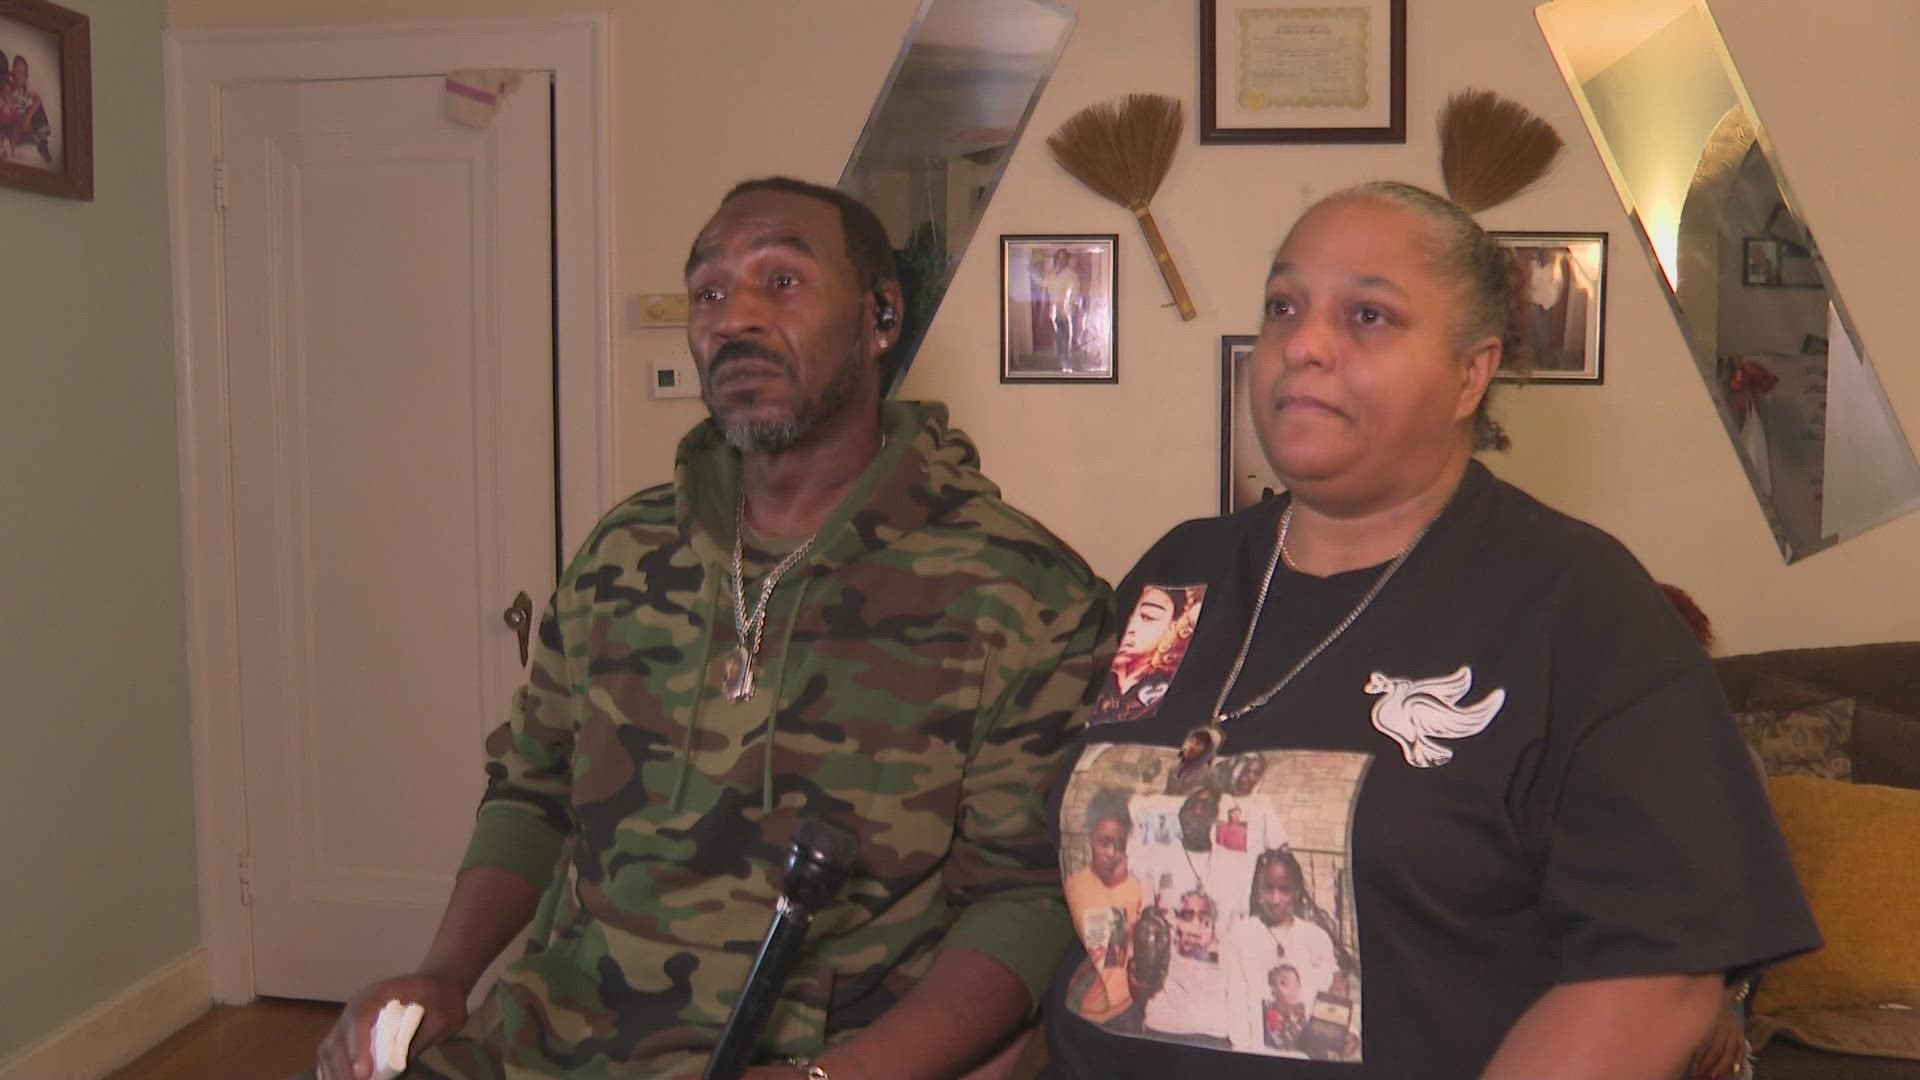 Navada and Krista Gwynn have looked at Louisville's homicide rates in agony since 2019; a total of 88 people were murdered that year, including their son.